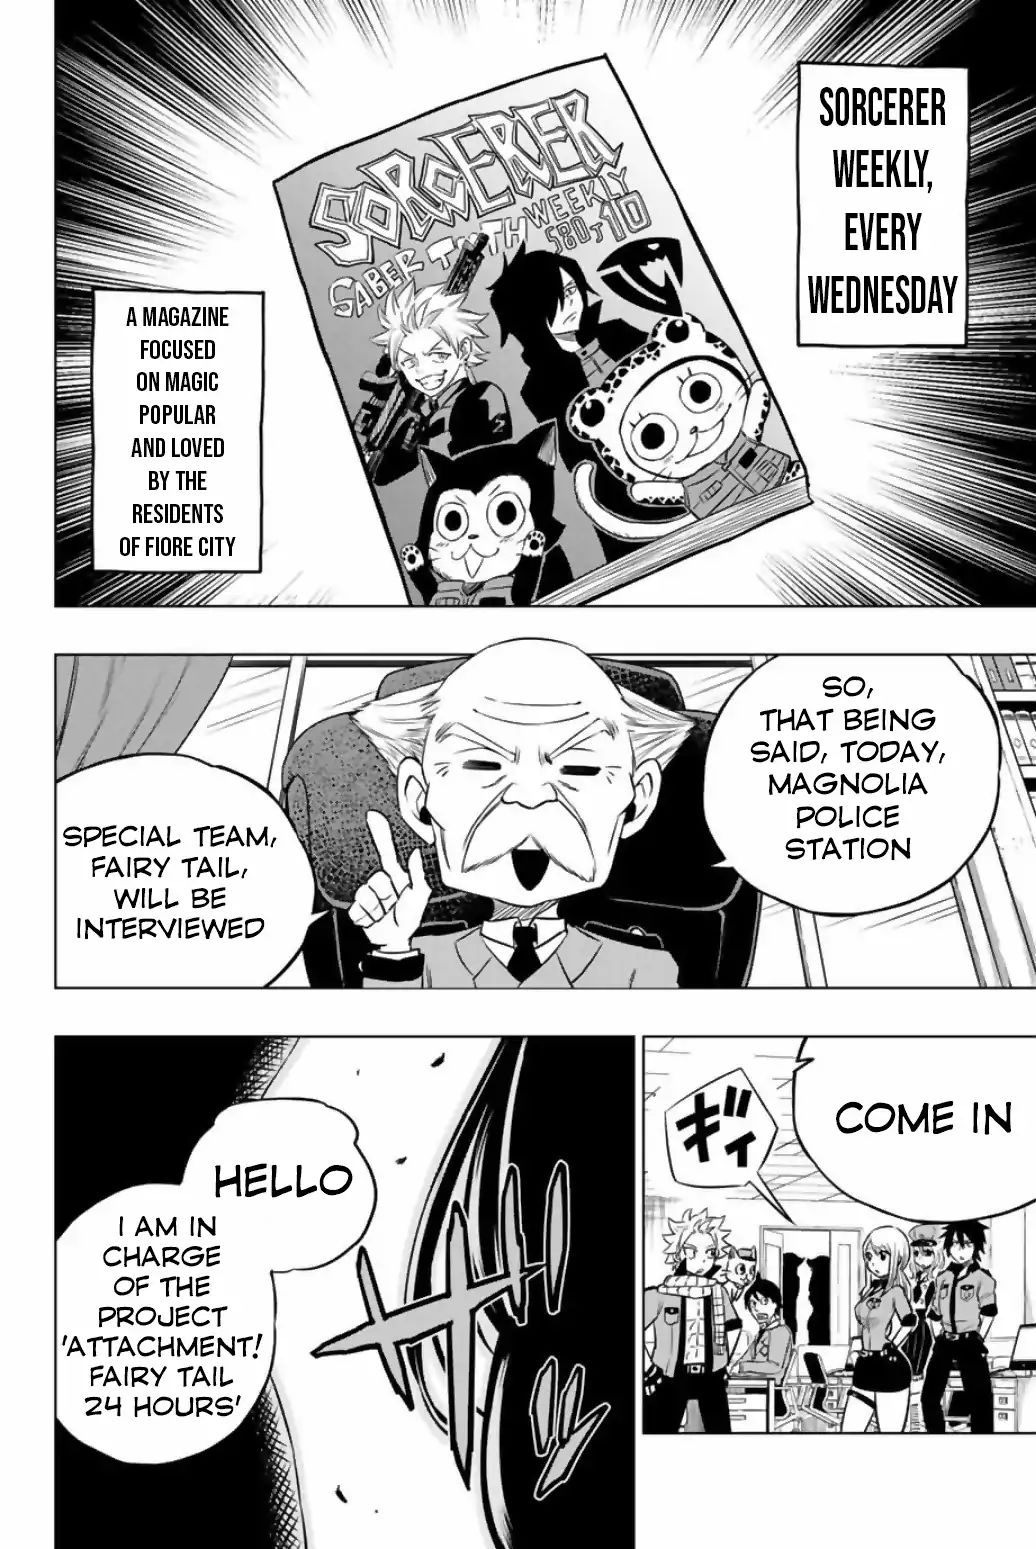 Fairy Tail City Hero Chapter 26: Attachment! Fairy Tail 24 Hours 1 - Picture 3